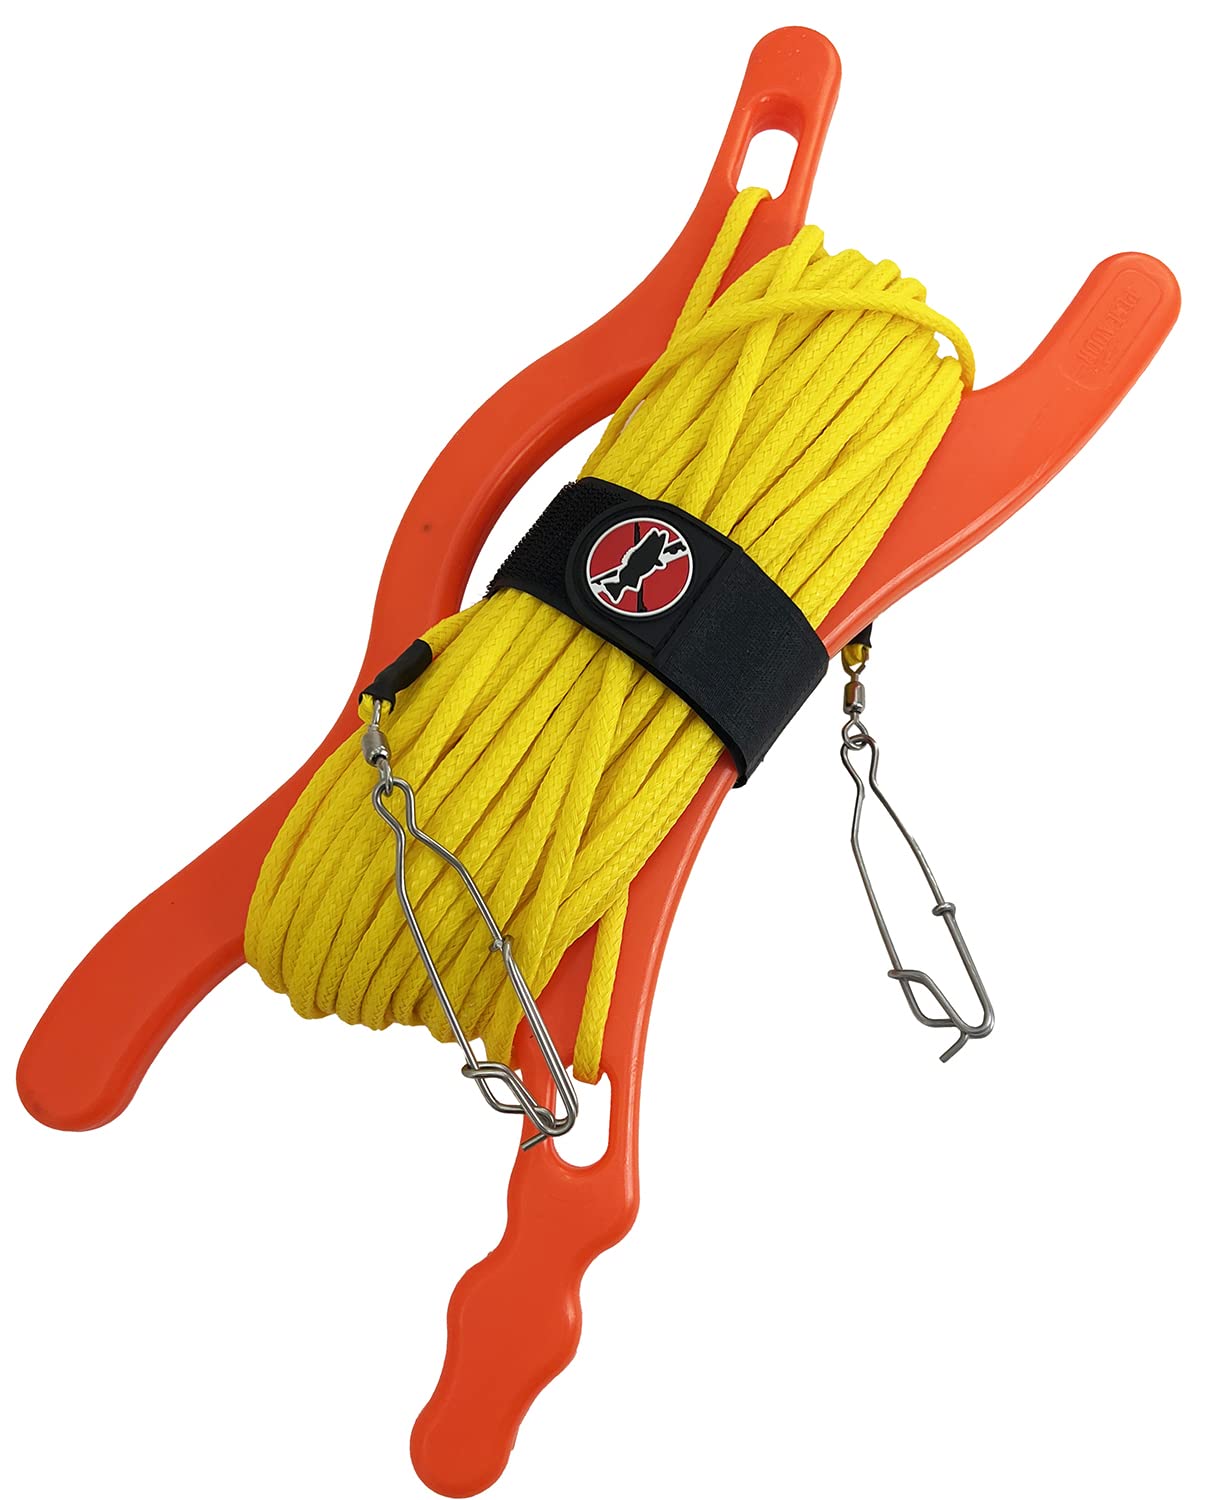 Float Line with Winder for Boating, Towing a Float or Buoy While